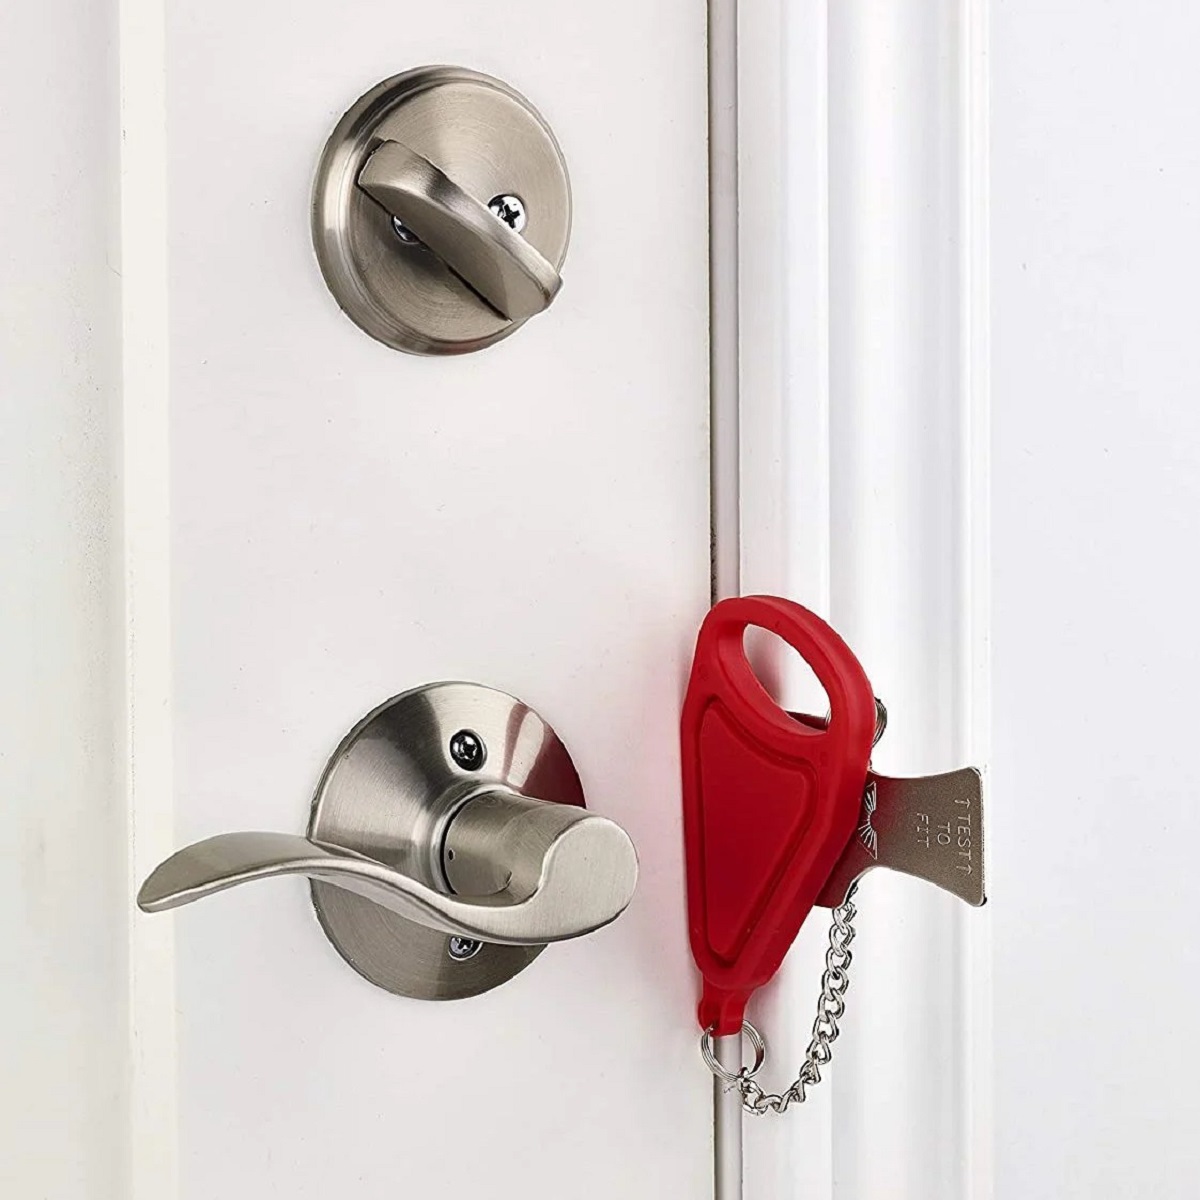 How To Lock A Door Without A Lock